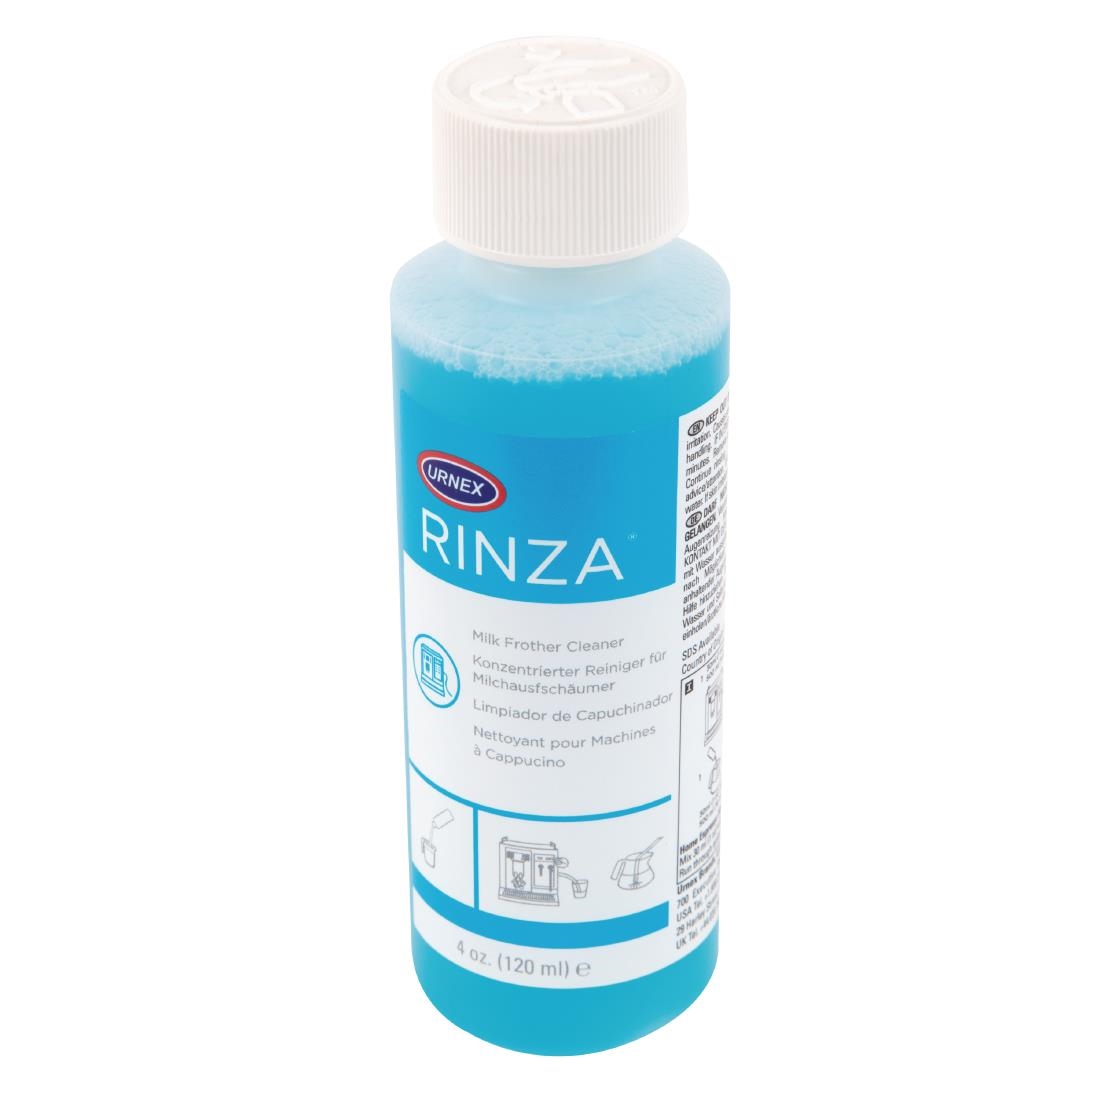 Urnex Rinza Alkaline Milk Frother Cleaner Liquid Concentrate 120ml (20 Pack)